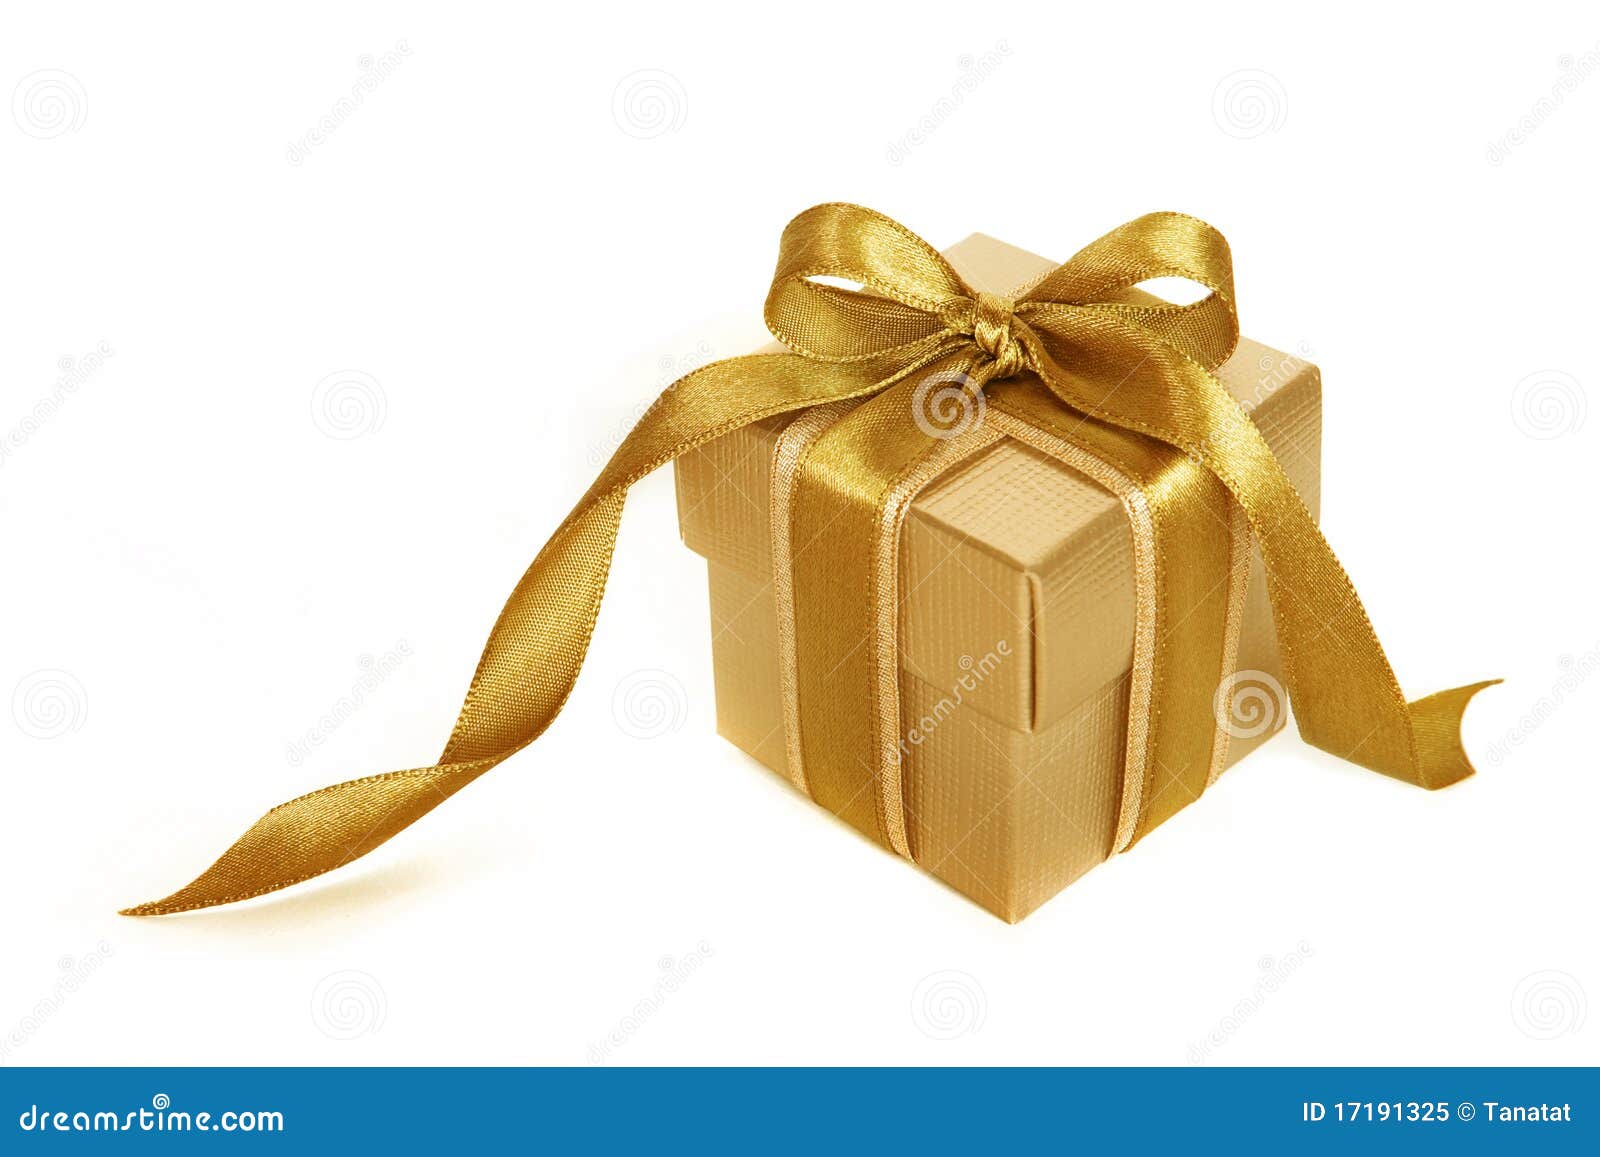 gold gift box with gold ribbon 